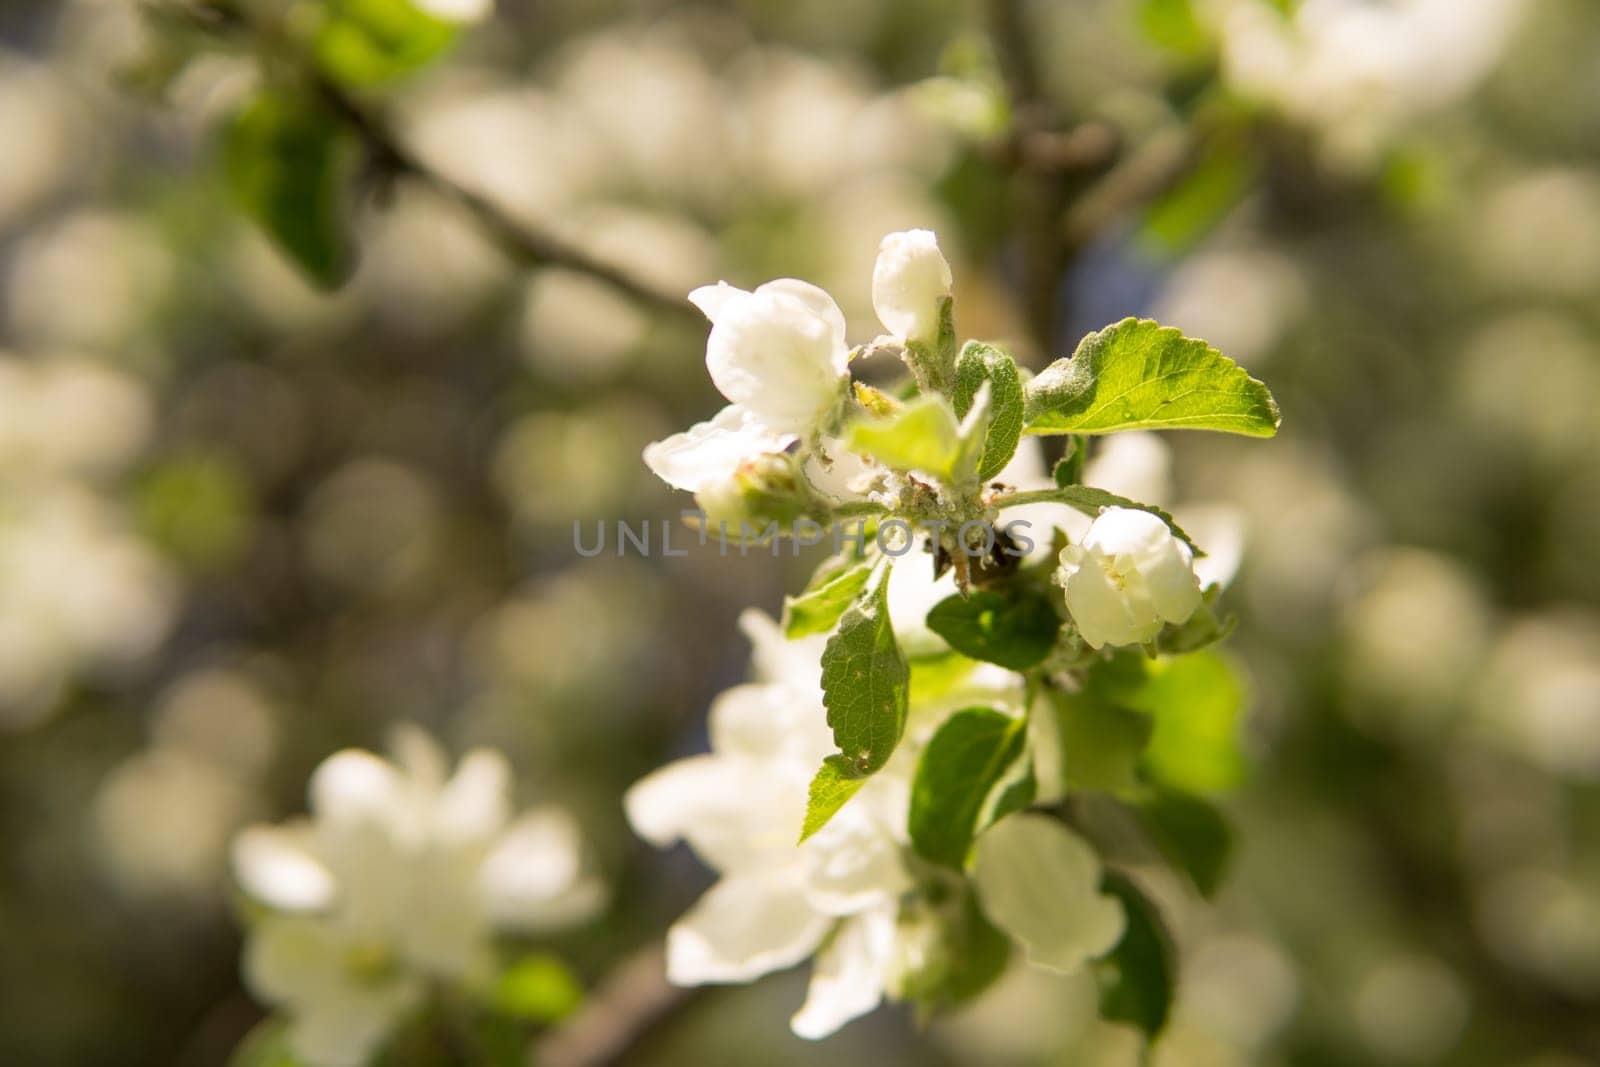 Blooming Apple tree branches with white flowers close-up, spring nature background